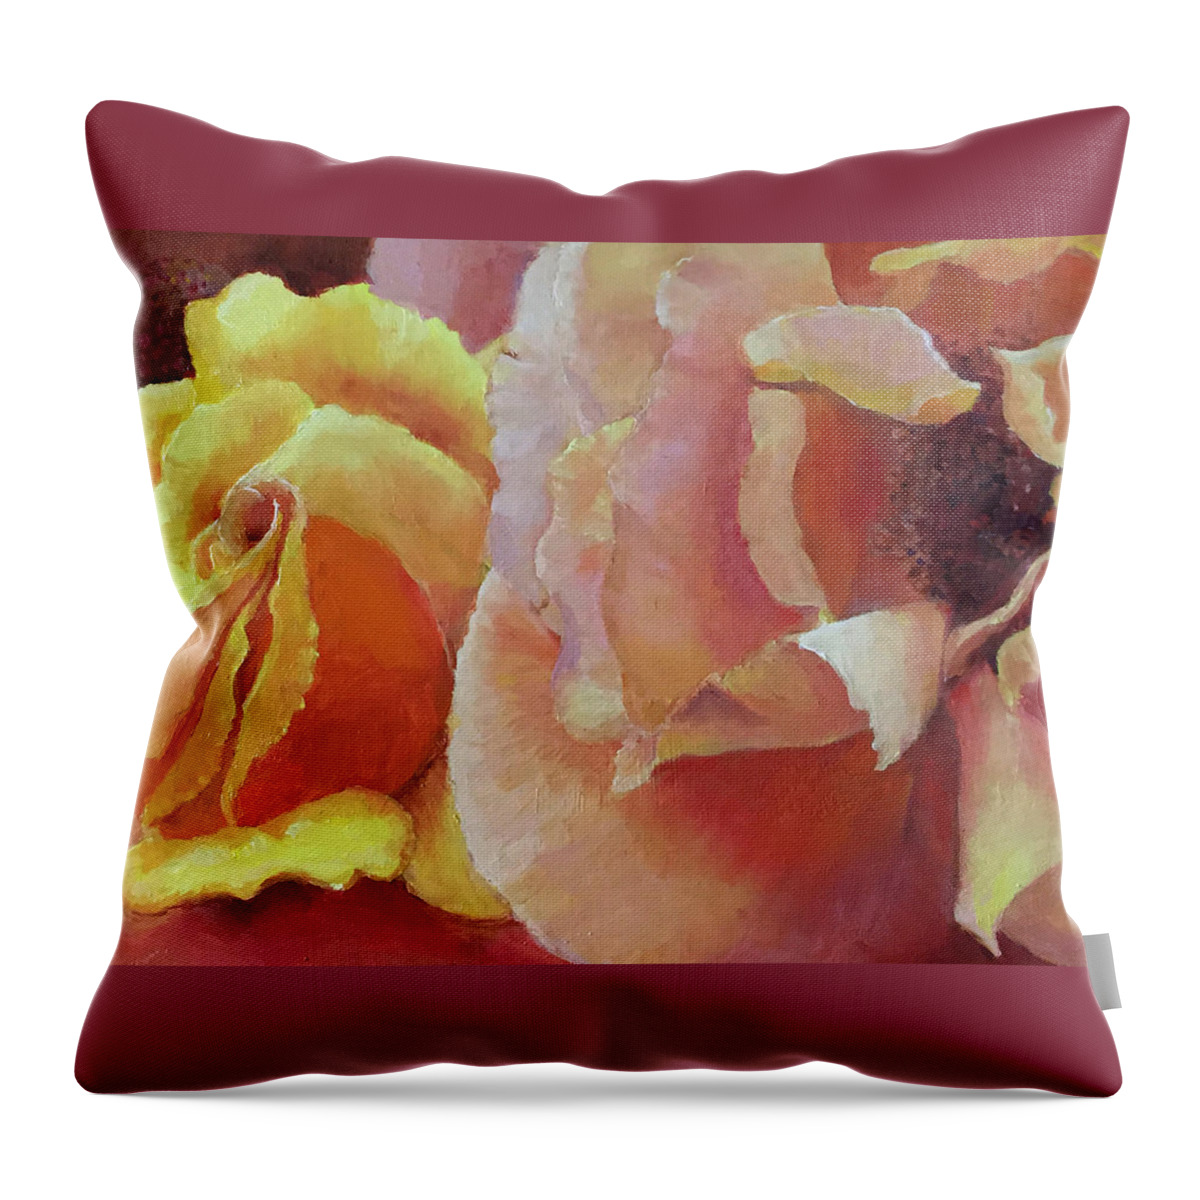 Oil Painting Throw Pillow featuring the painting Changing Colors by Harriett Masterson